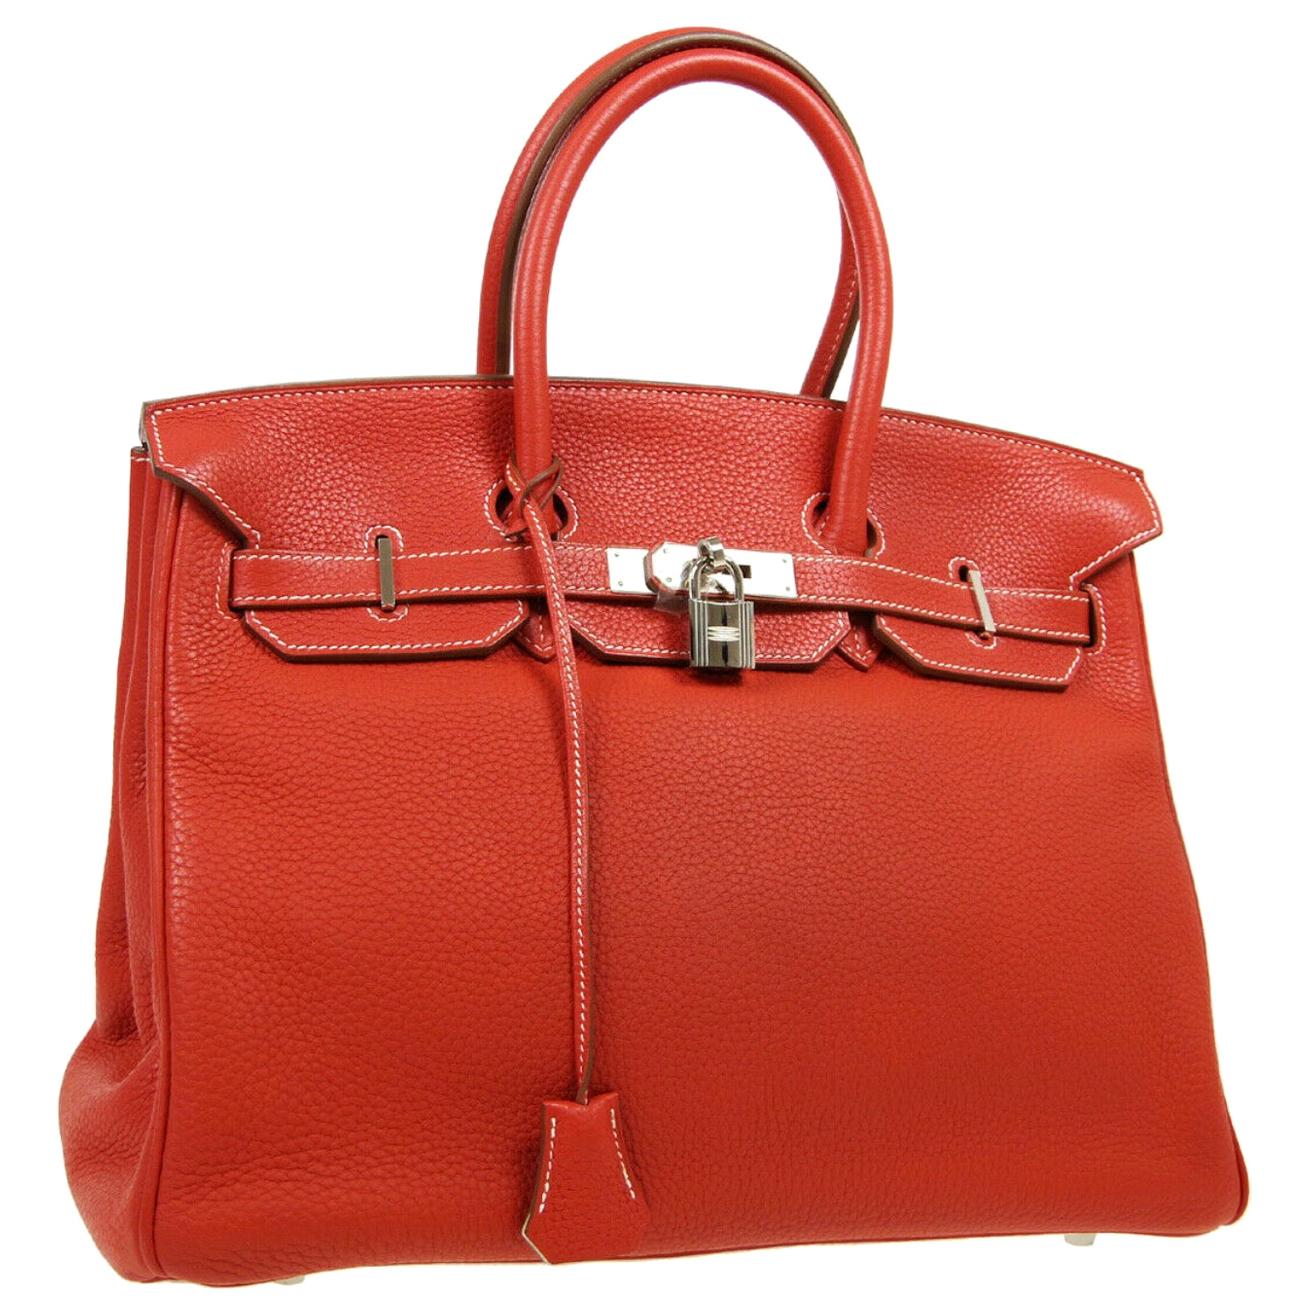 Hermes Birkin 35 Special Order Red White Leather Palladium Top Handle Tote Bag